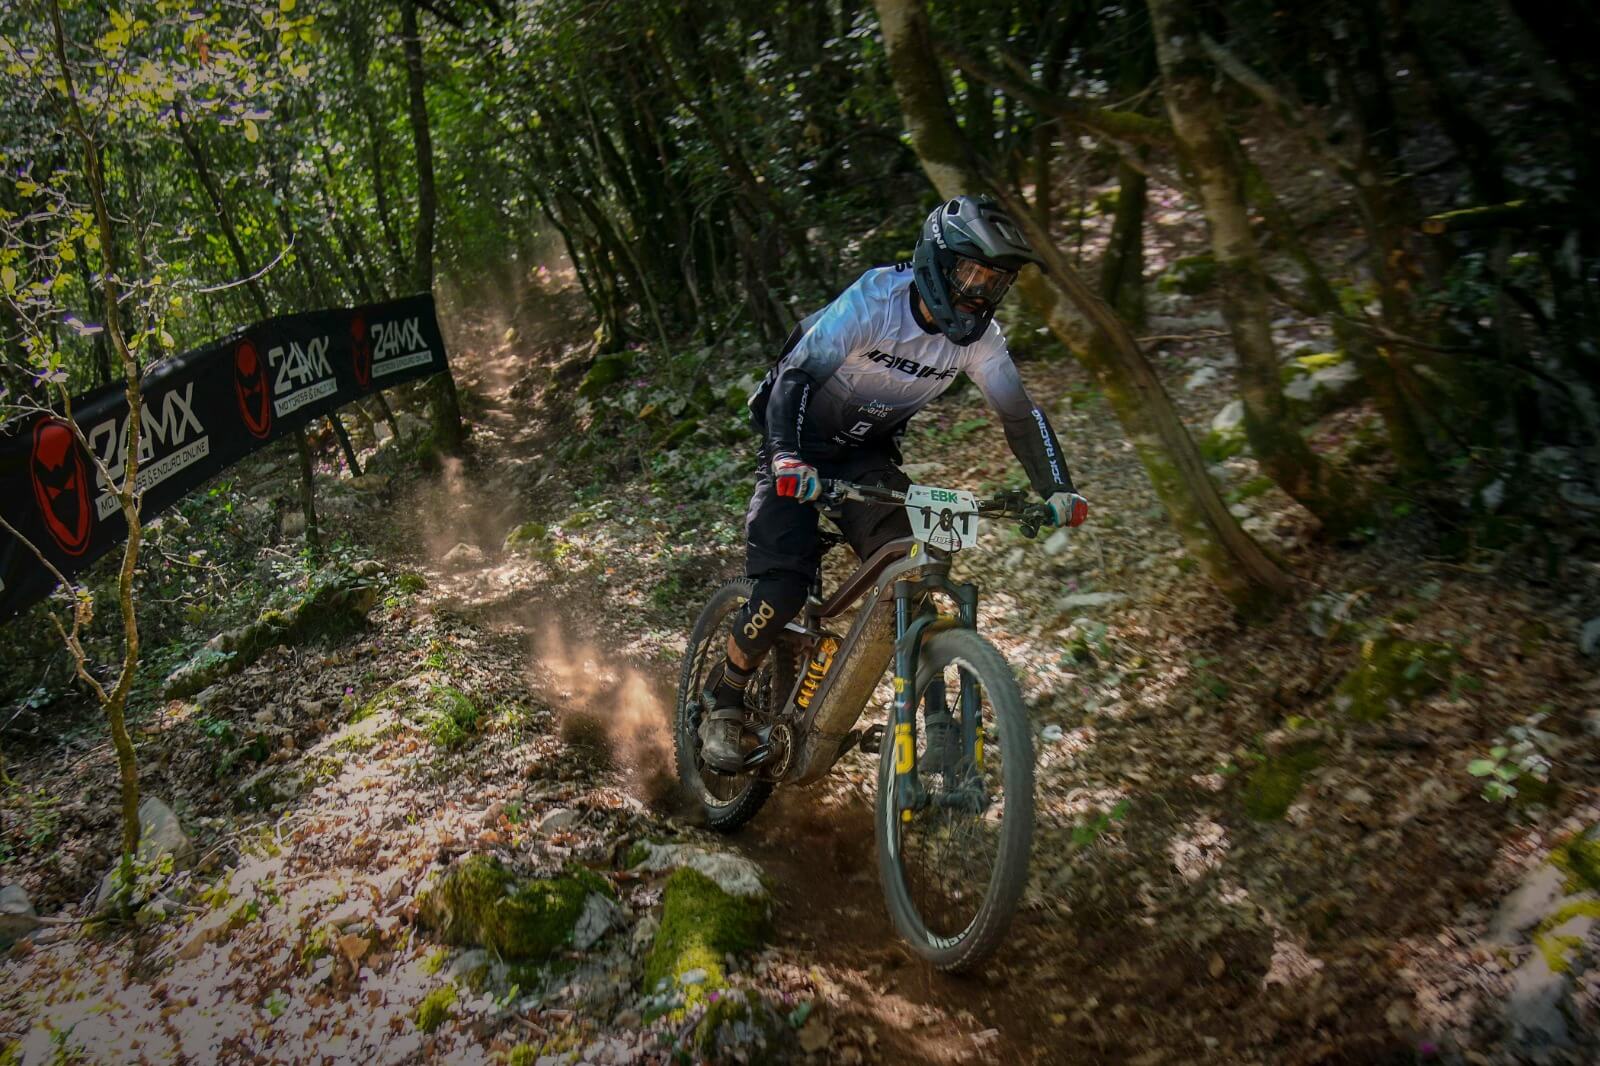 Haibike Hero Andrea Garibbo riding through a forest during the Enduro World Series